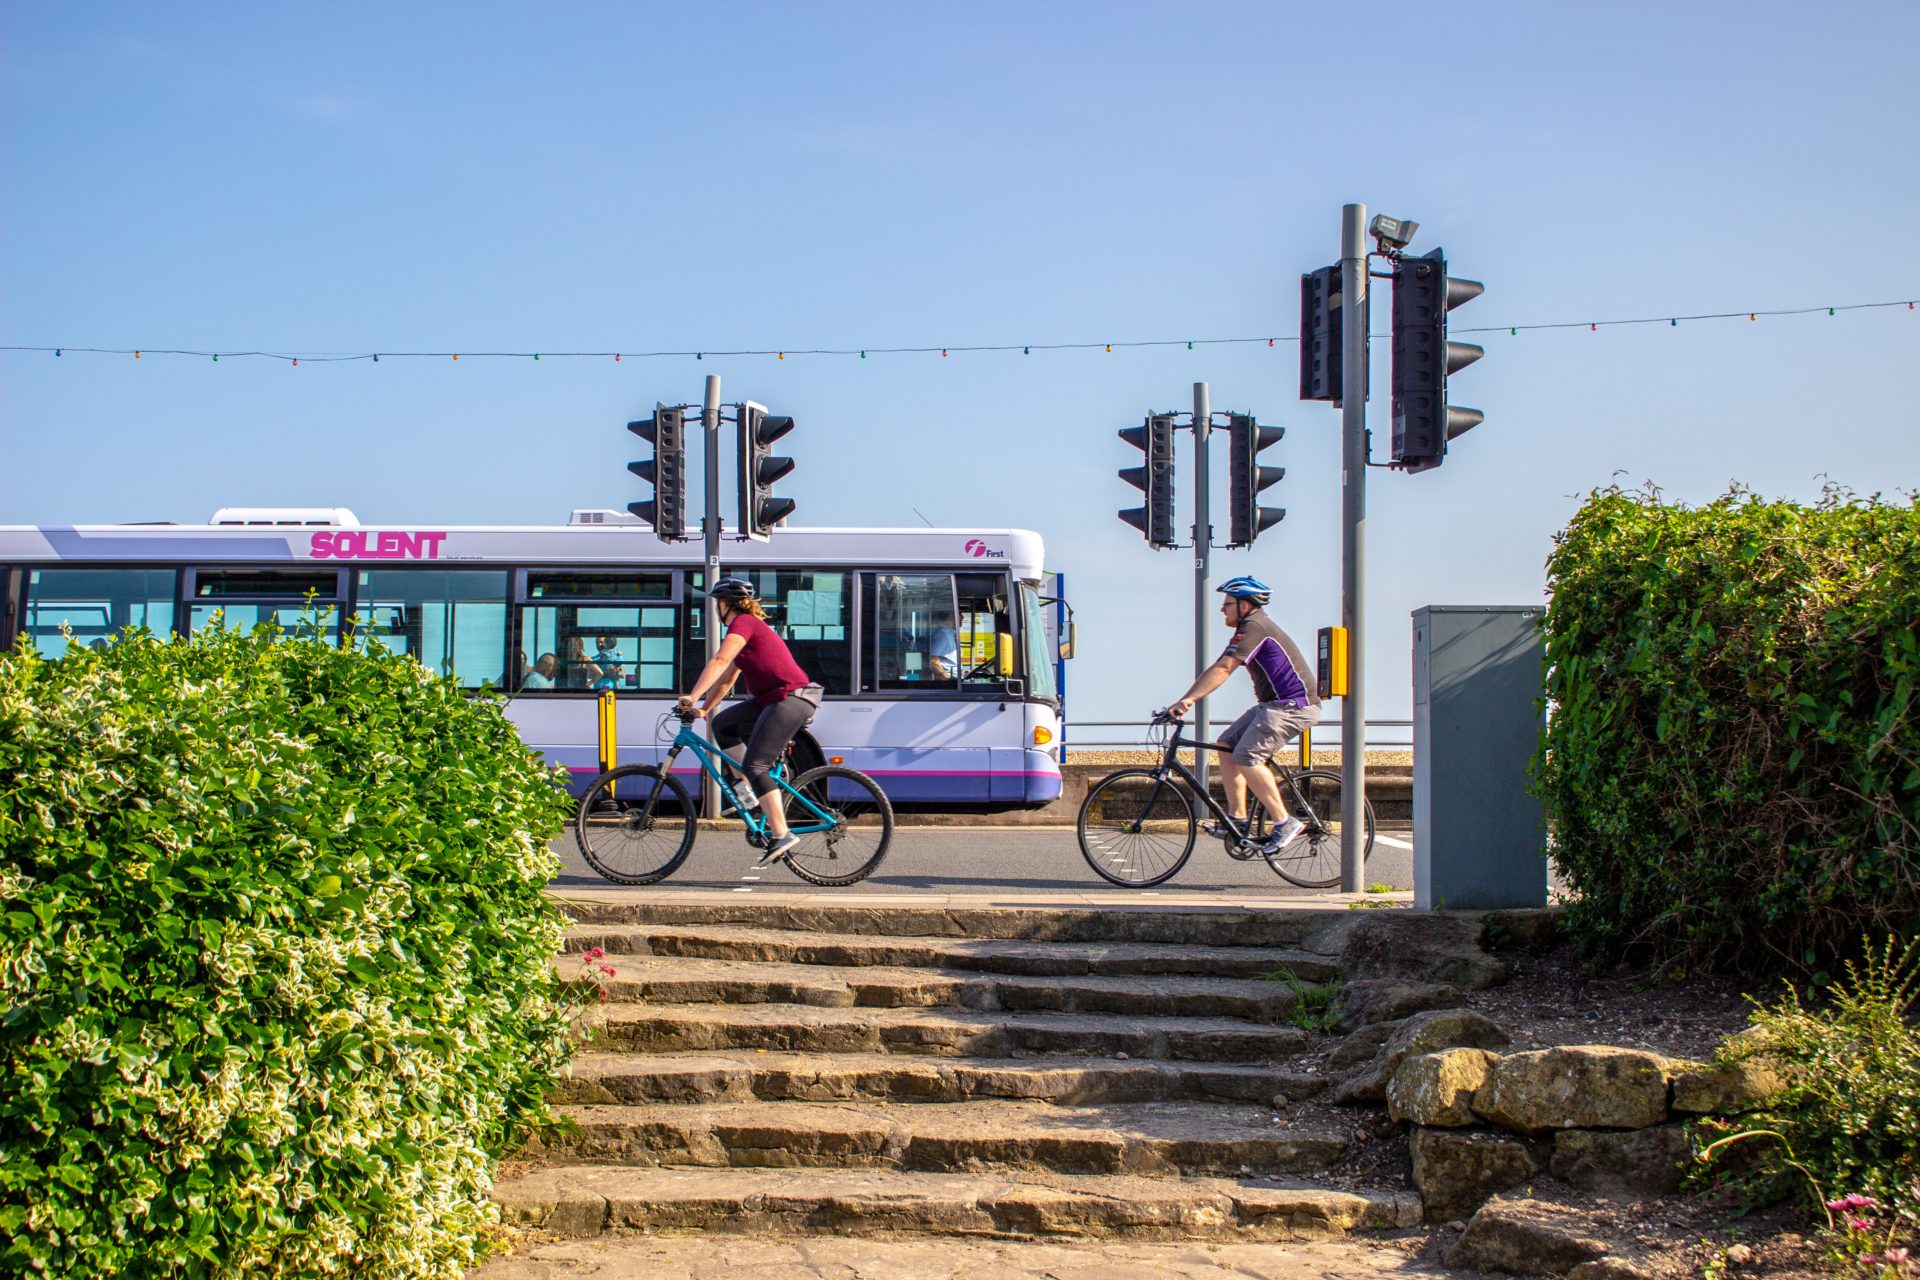 Bus and cyclists